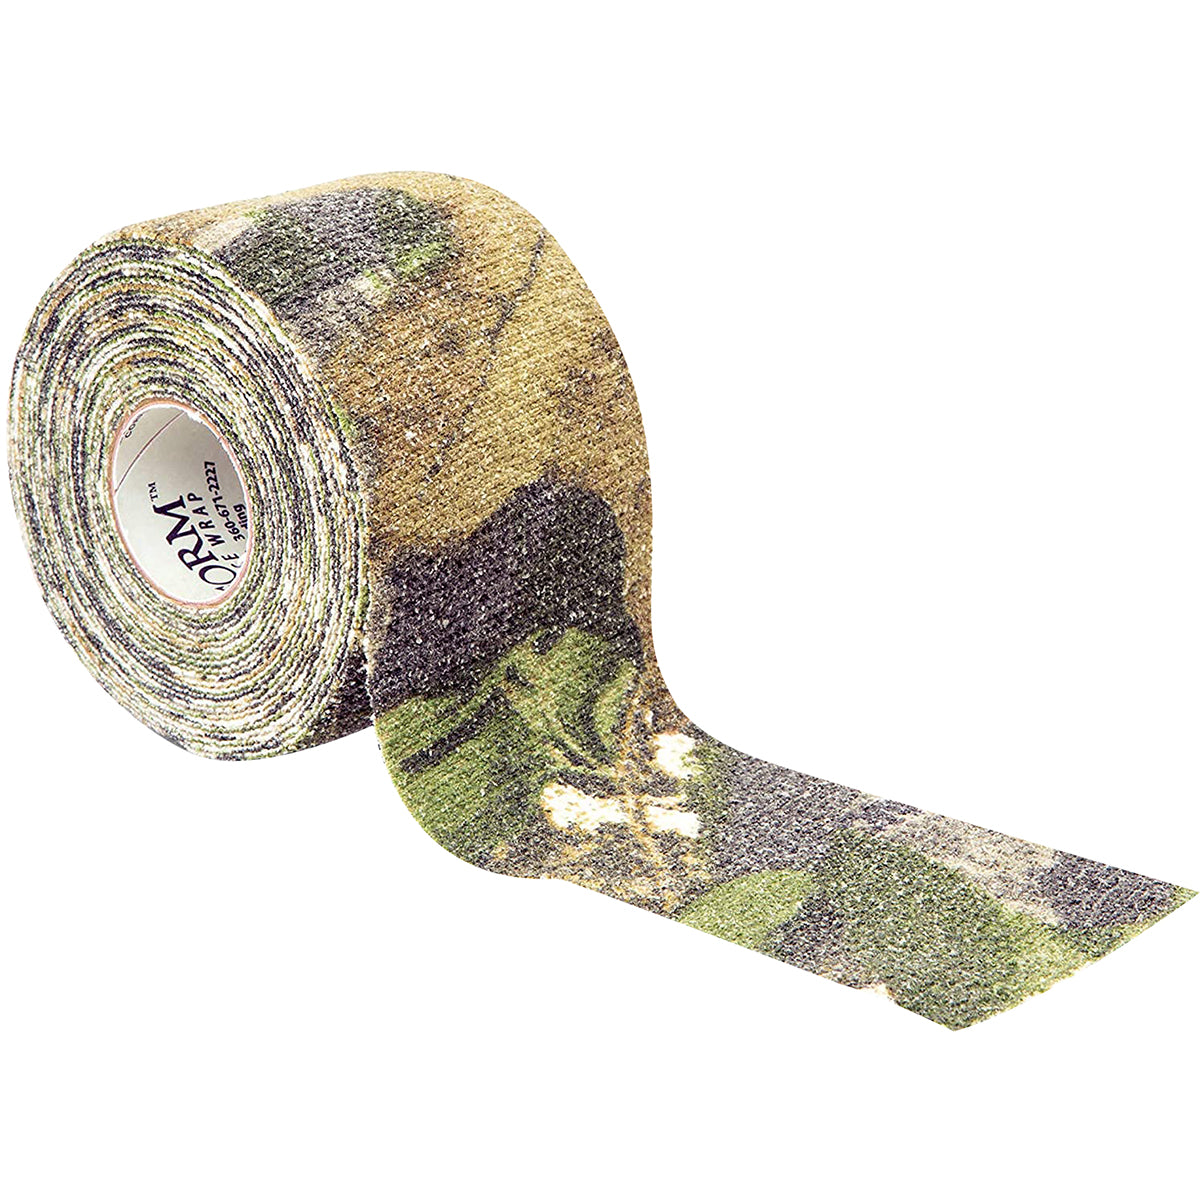 McNett Tactical Camo Form Protective Mossy Oak Obsession Fabric Tape Gear Aid